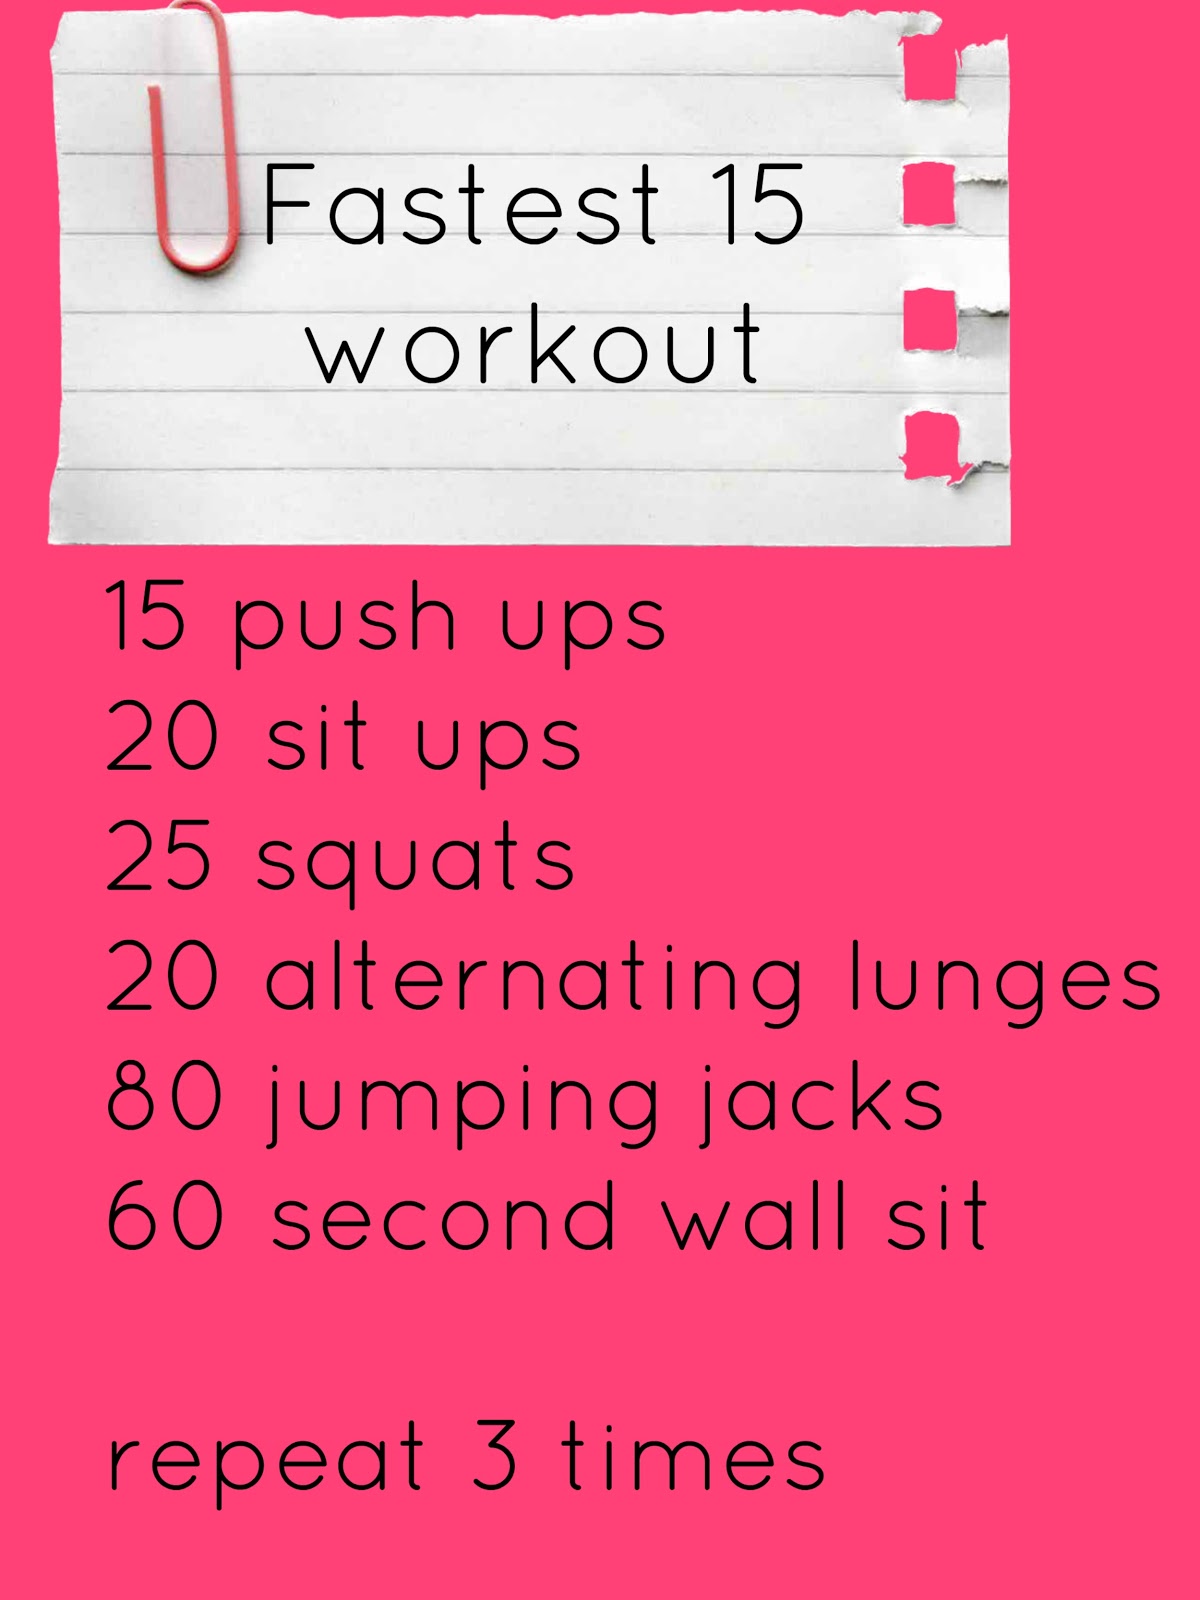 Fastest 15 workout